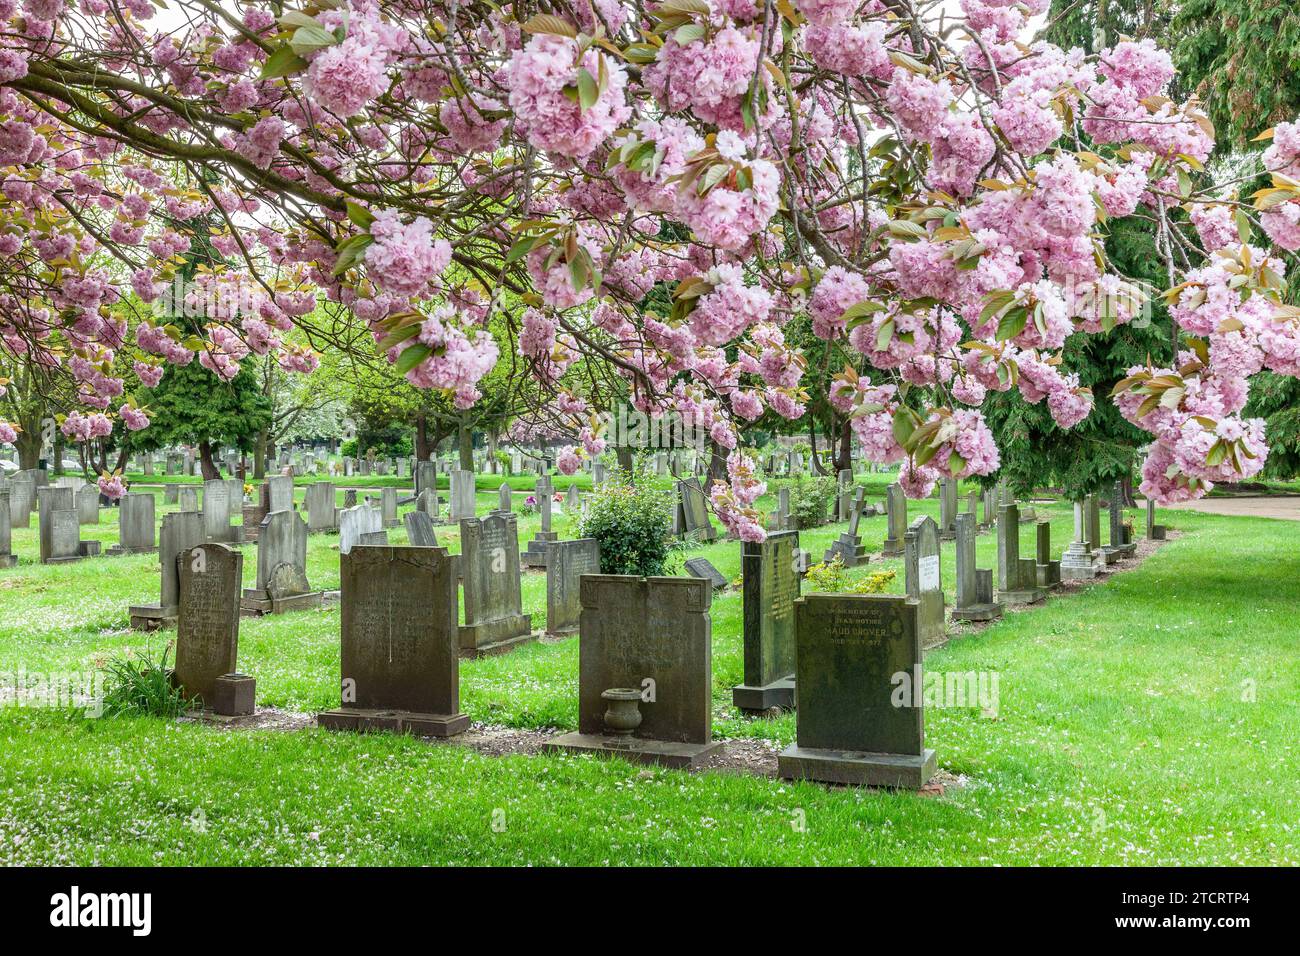 Twickenham Cemetery during the spring flowering of its trees. Stock Photo